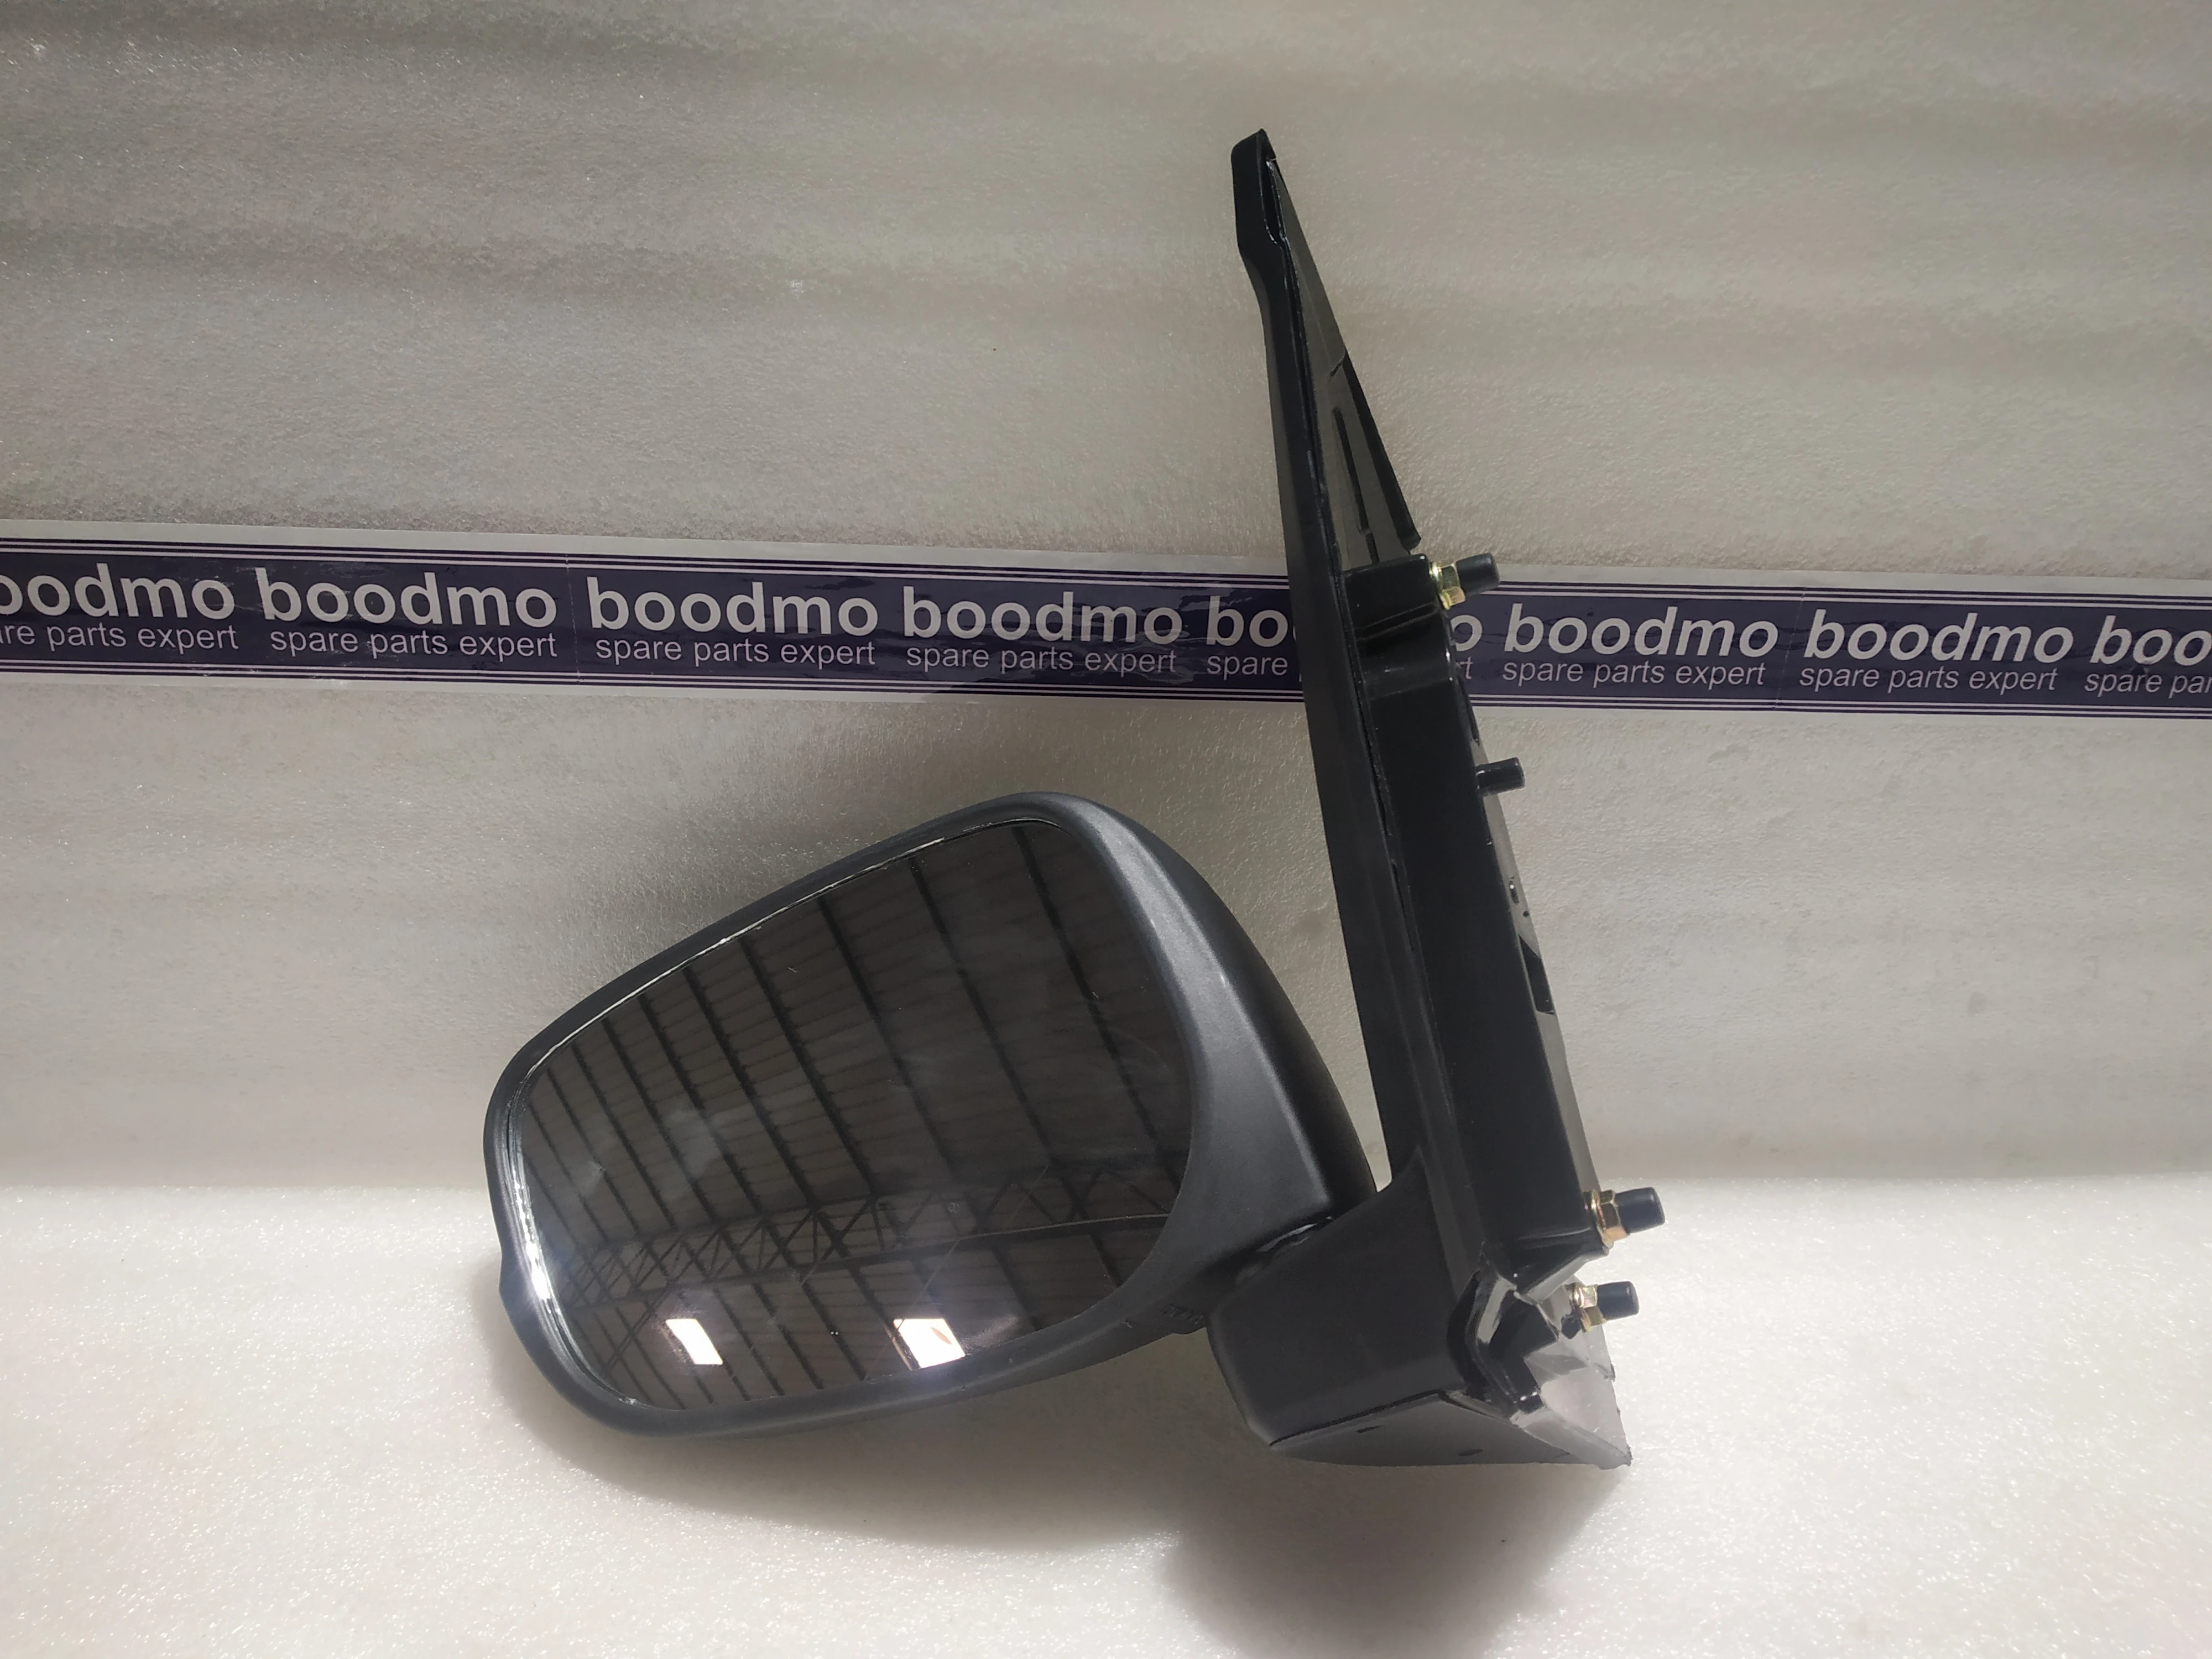 Side Rear View Mirror Left: DKMAX 148-SAMZ-L -compatibility, features,  prices. boodmo